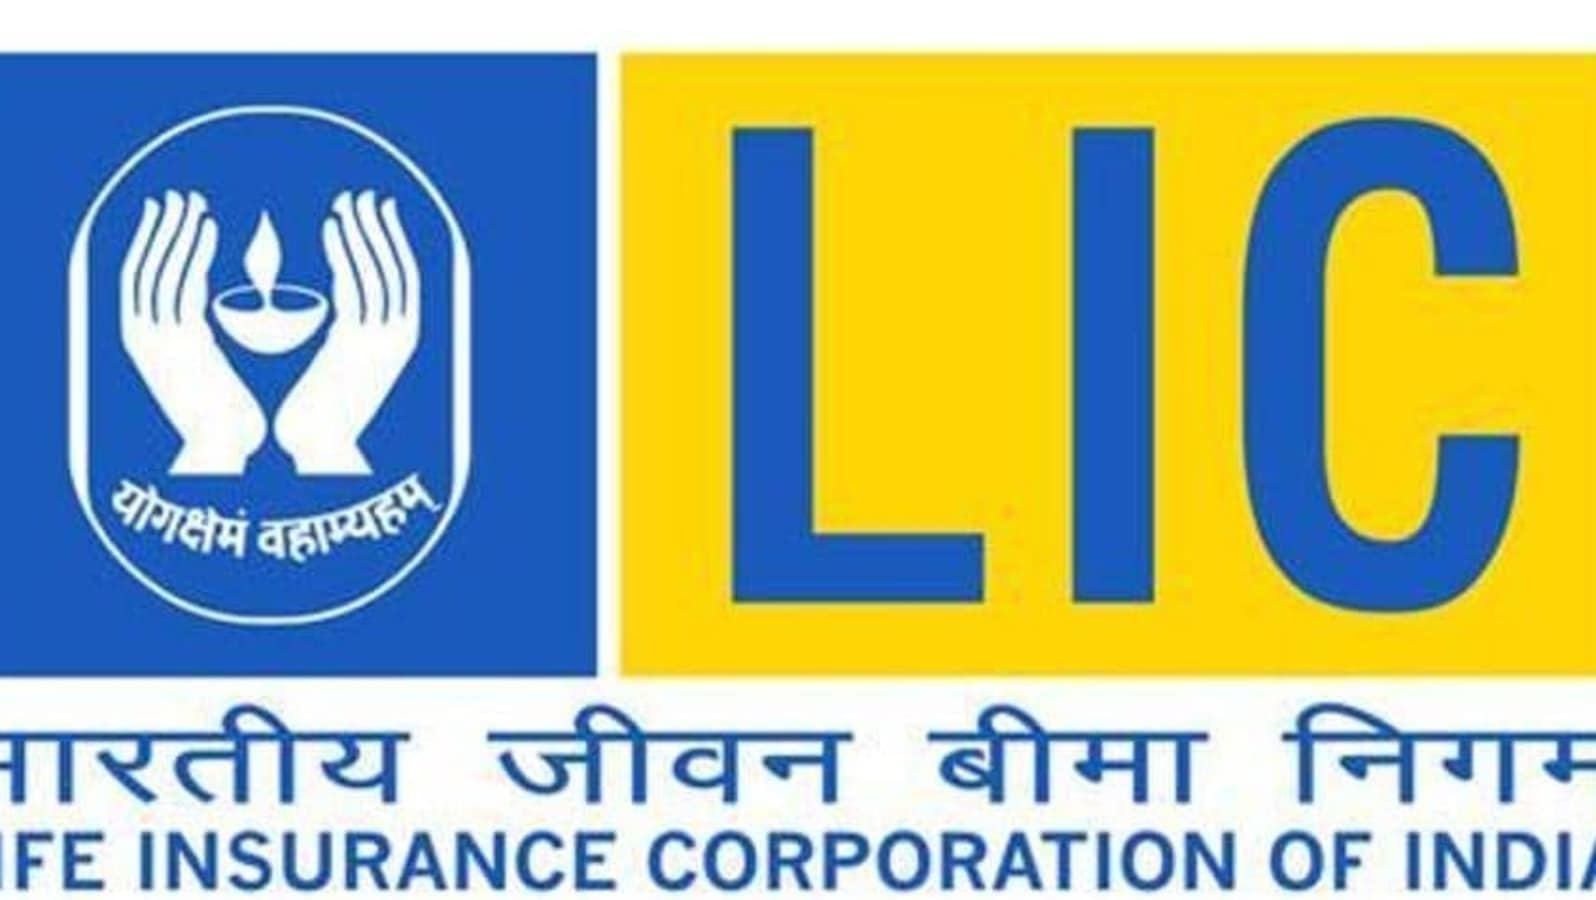 LIC services now available on WhatsApp. Check details - Hindustan ...